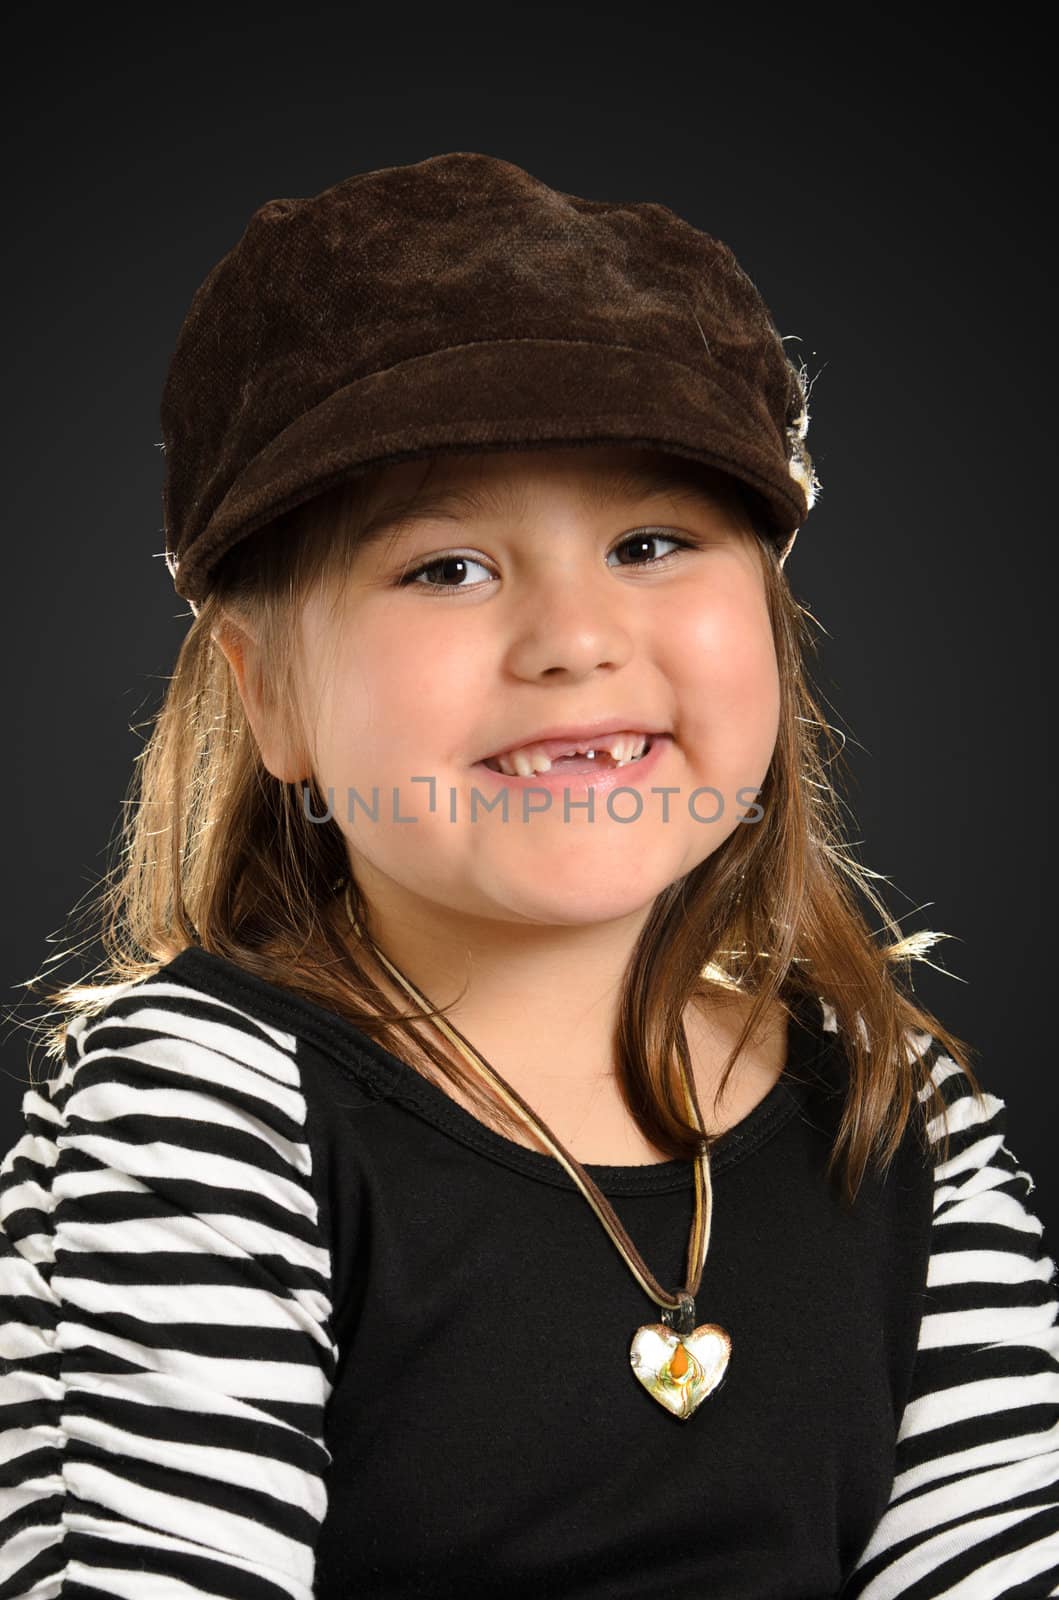 Portrait of a kindergarten girl smiling and wearing stylish clothes, shot with a backlight.